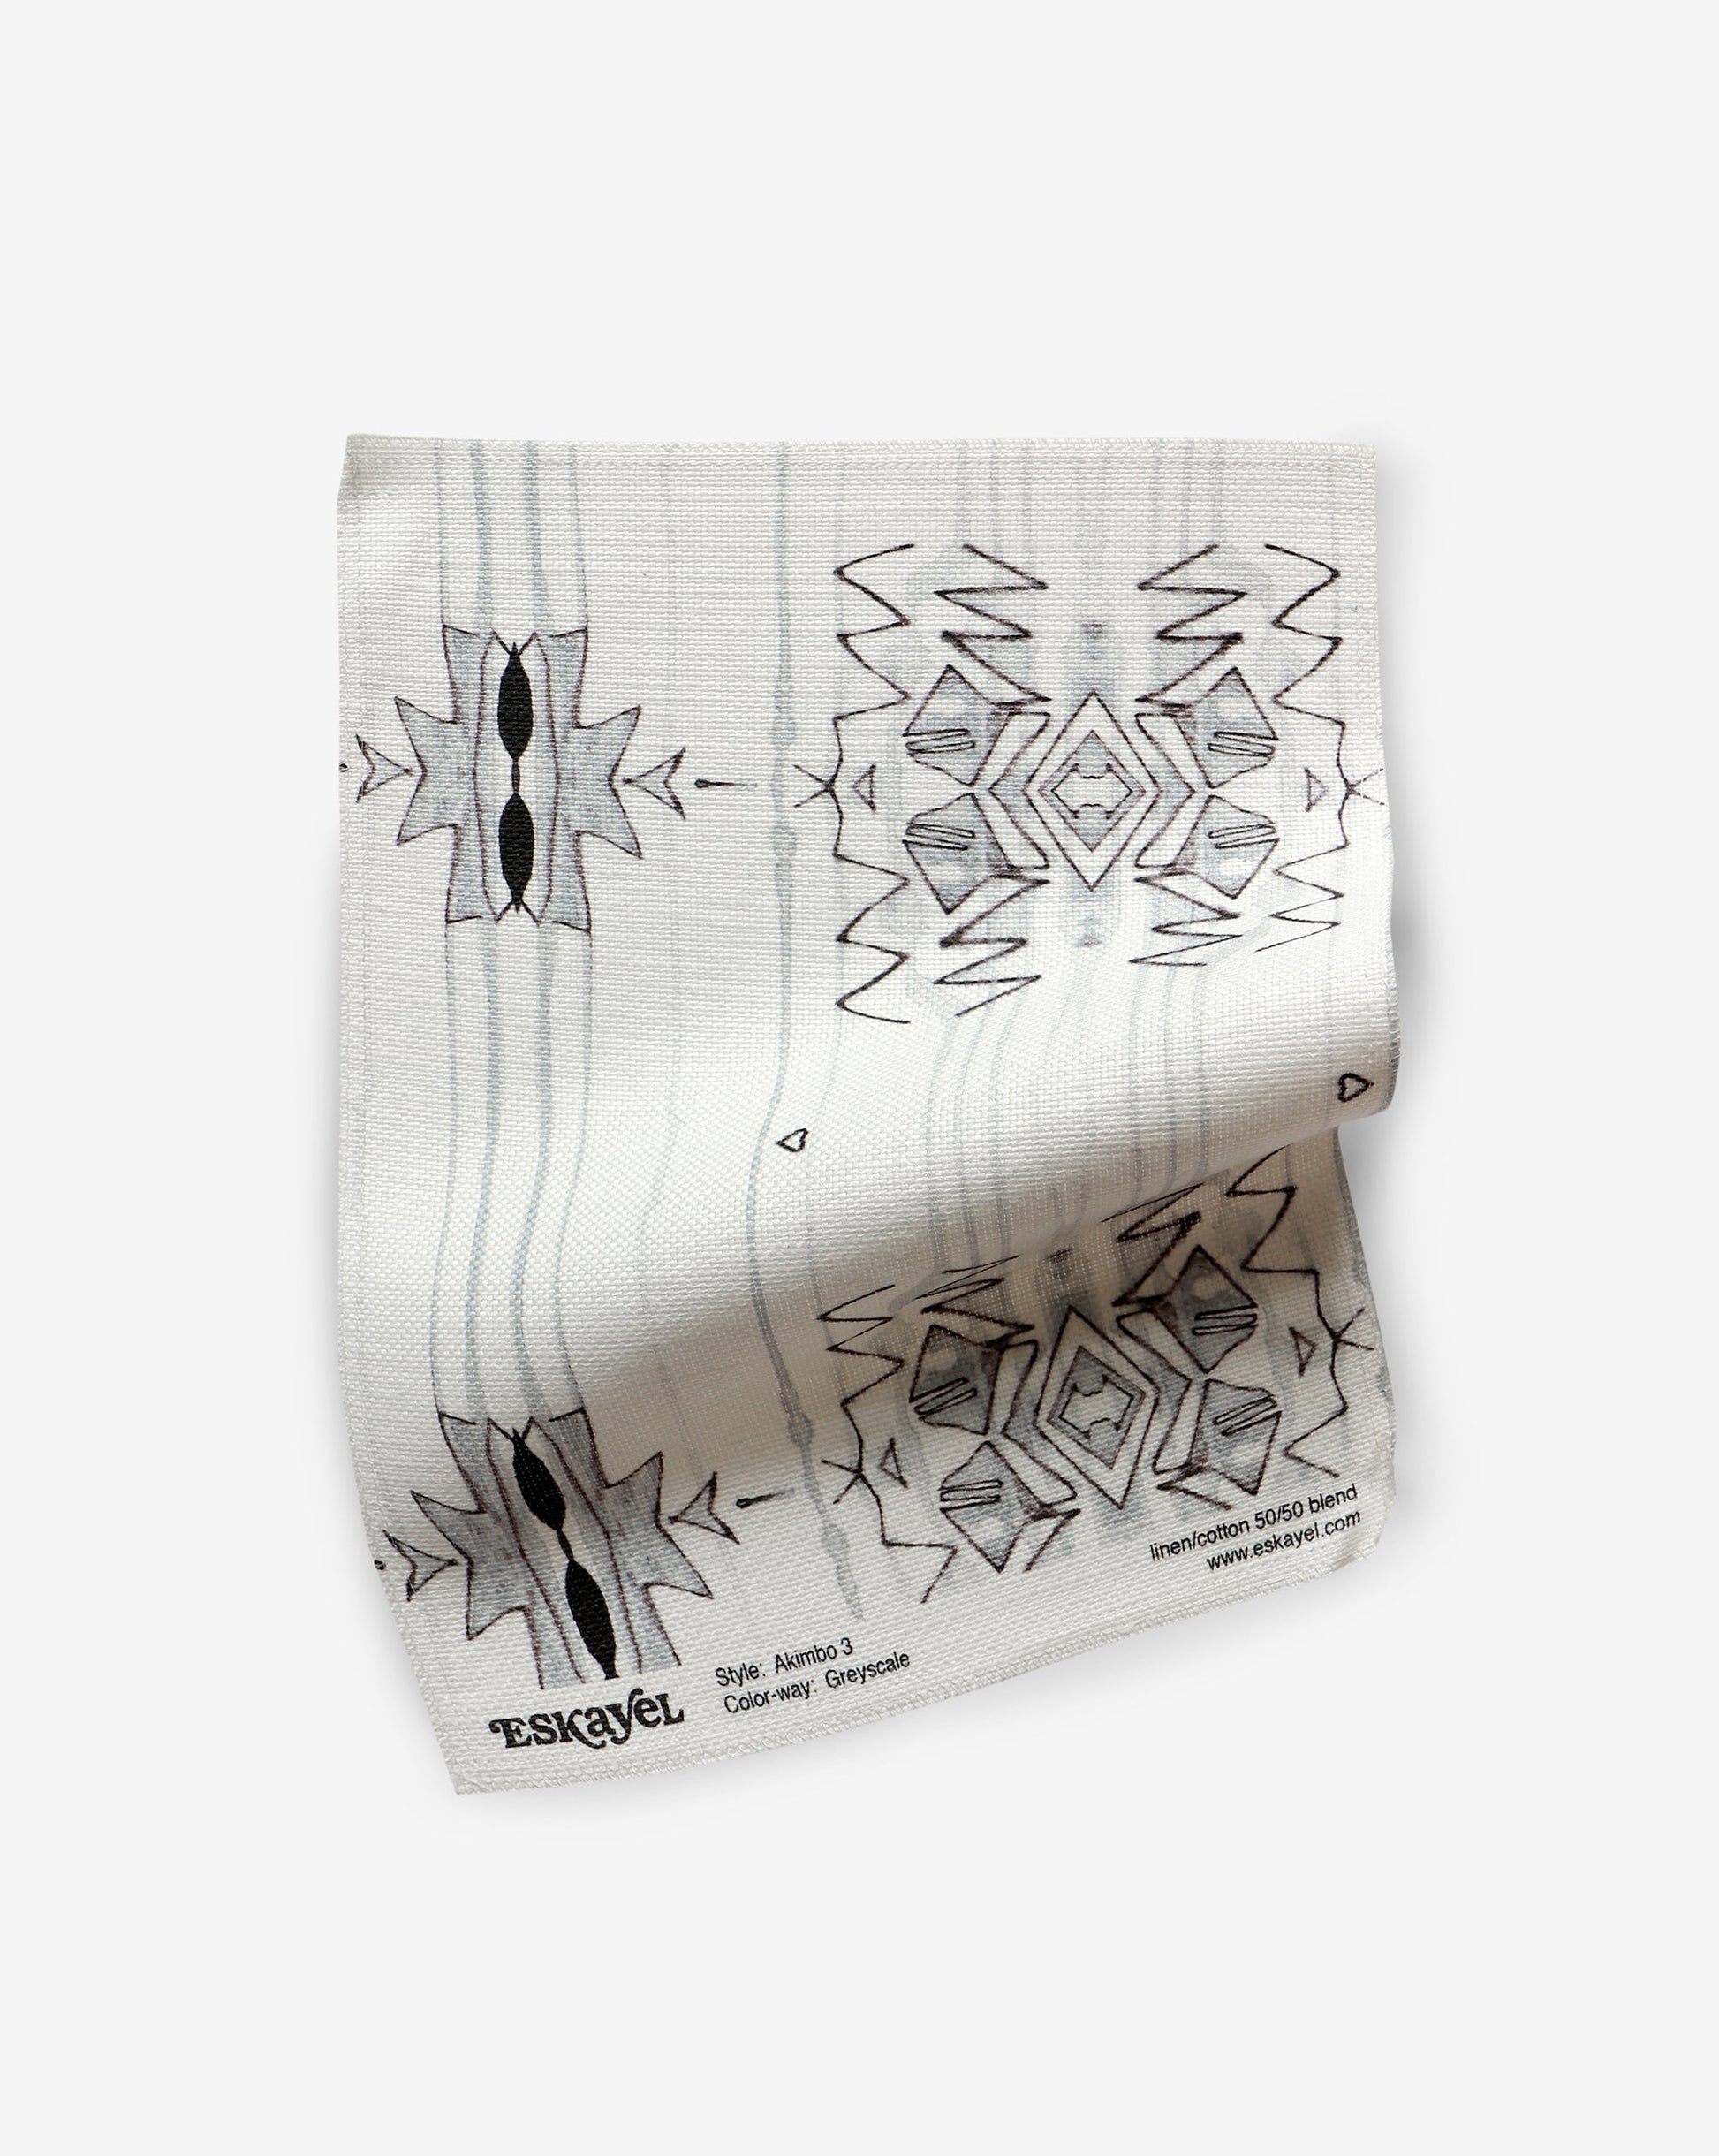 A versatile Akimbo 3 Fabric Greyscale fabric with a graphic geometric pattern on it